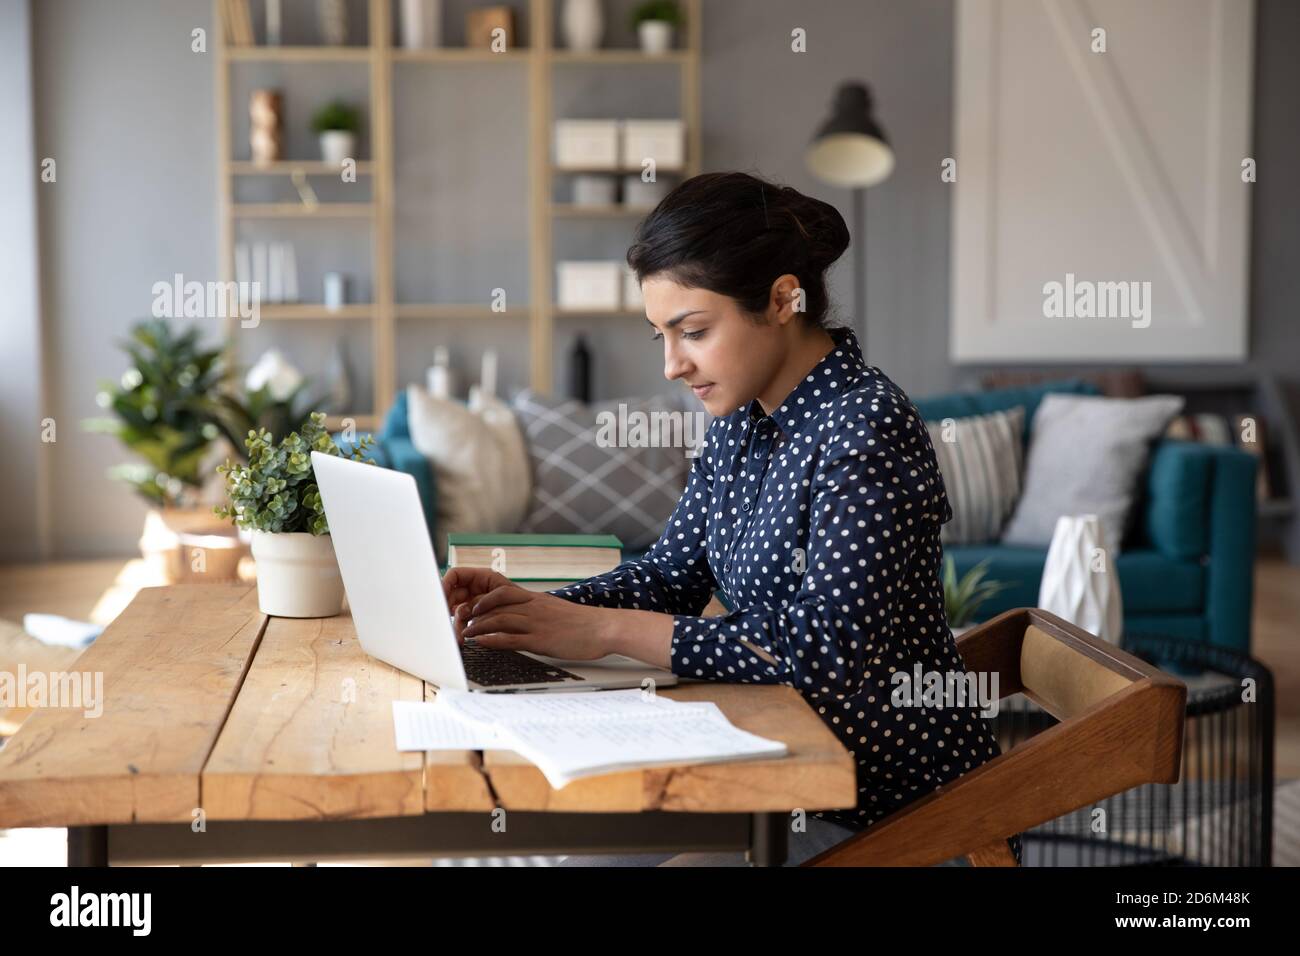 Businesswoman sit at desk in modern room texting on laptop Stock Photo